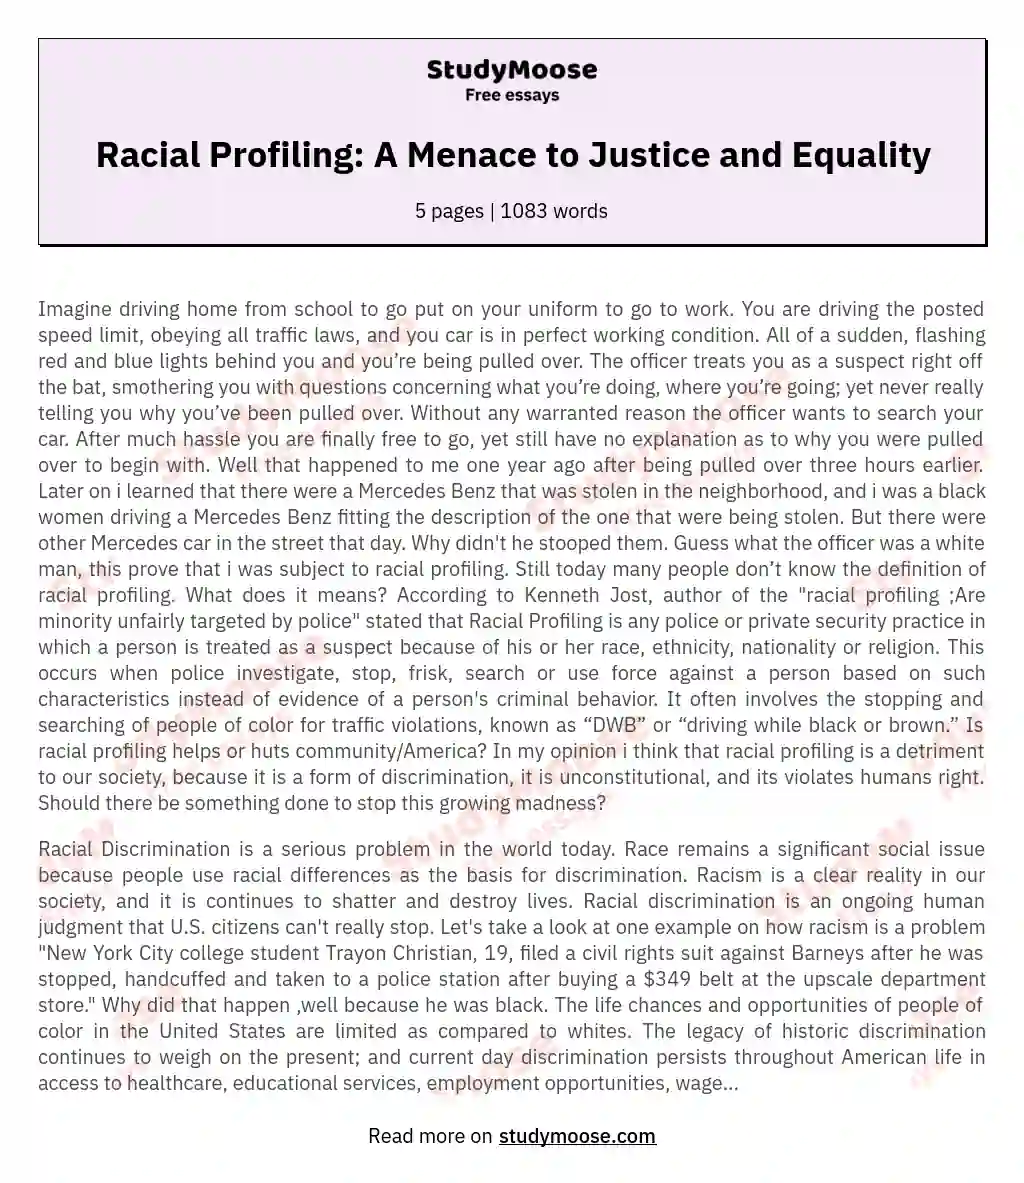 Racial Profiling: A Menace to Justice and Equality essay